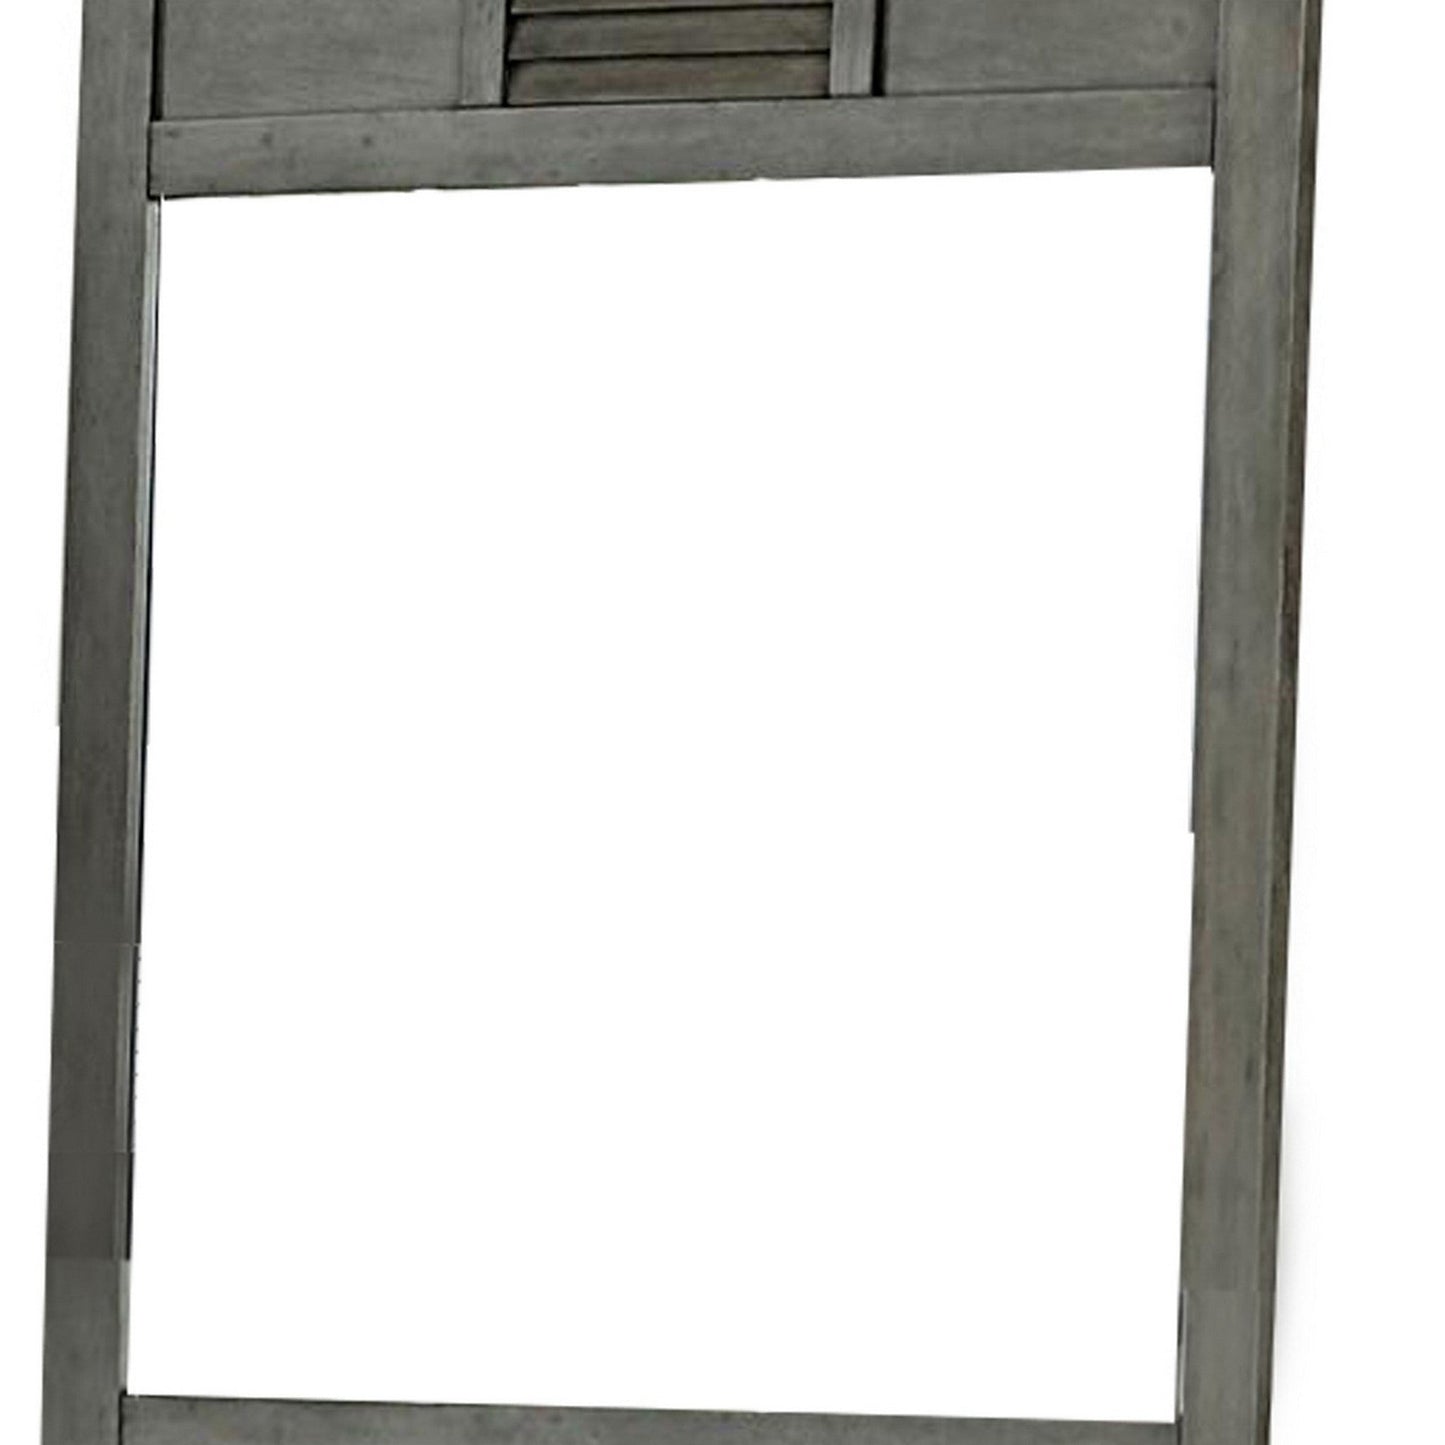 Benzara Gray Wooden Framed Mirror With Shutter Design and Projected Top